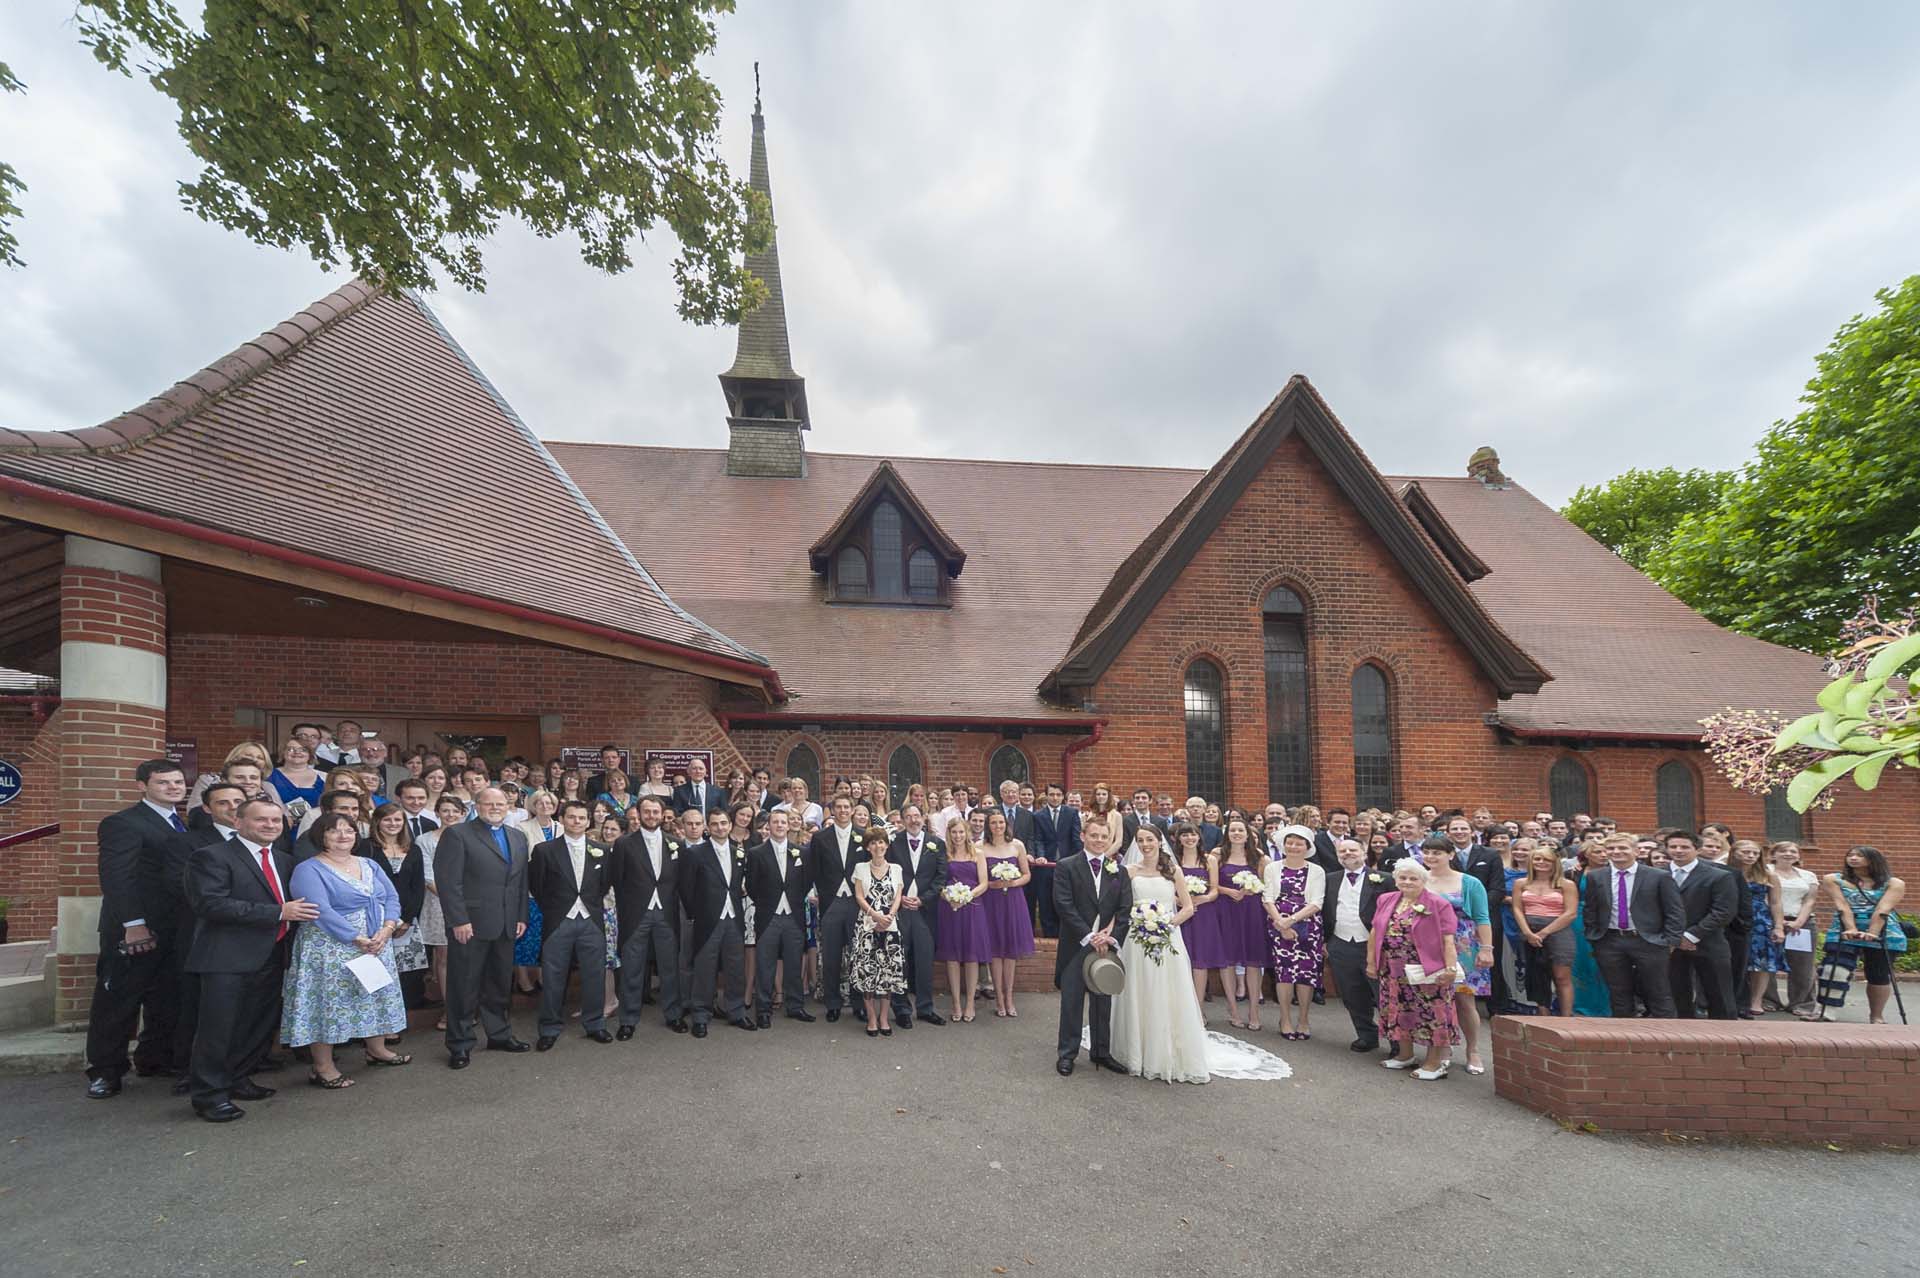 Surrey wedding ashtead entire group of guests st georges church bromley south london wedding photographer article on extreme wide angle lenses